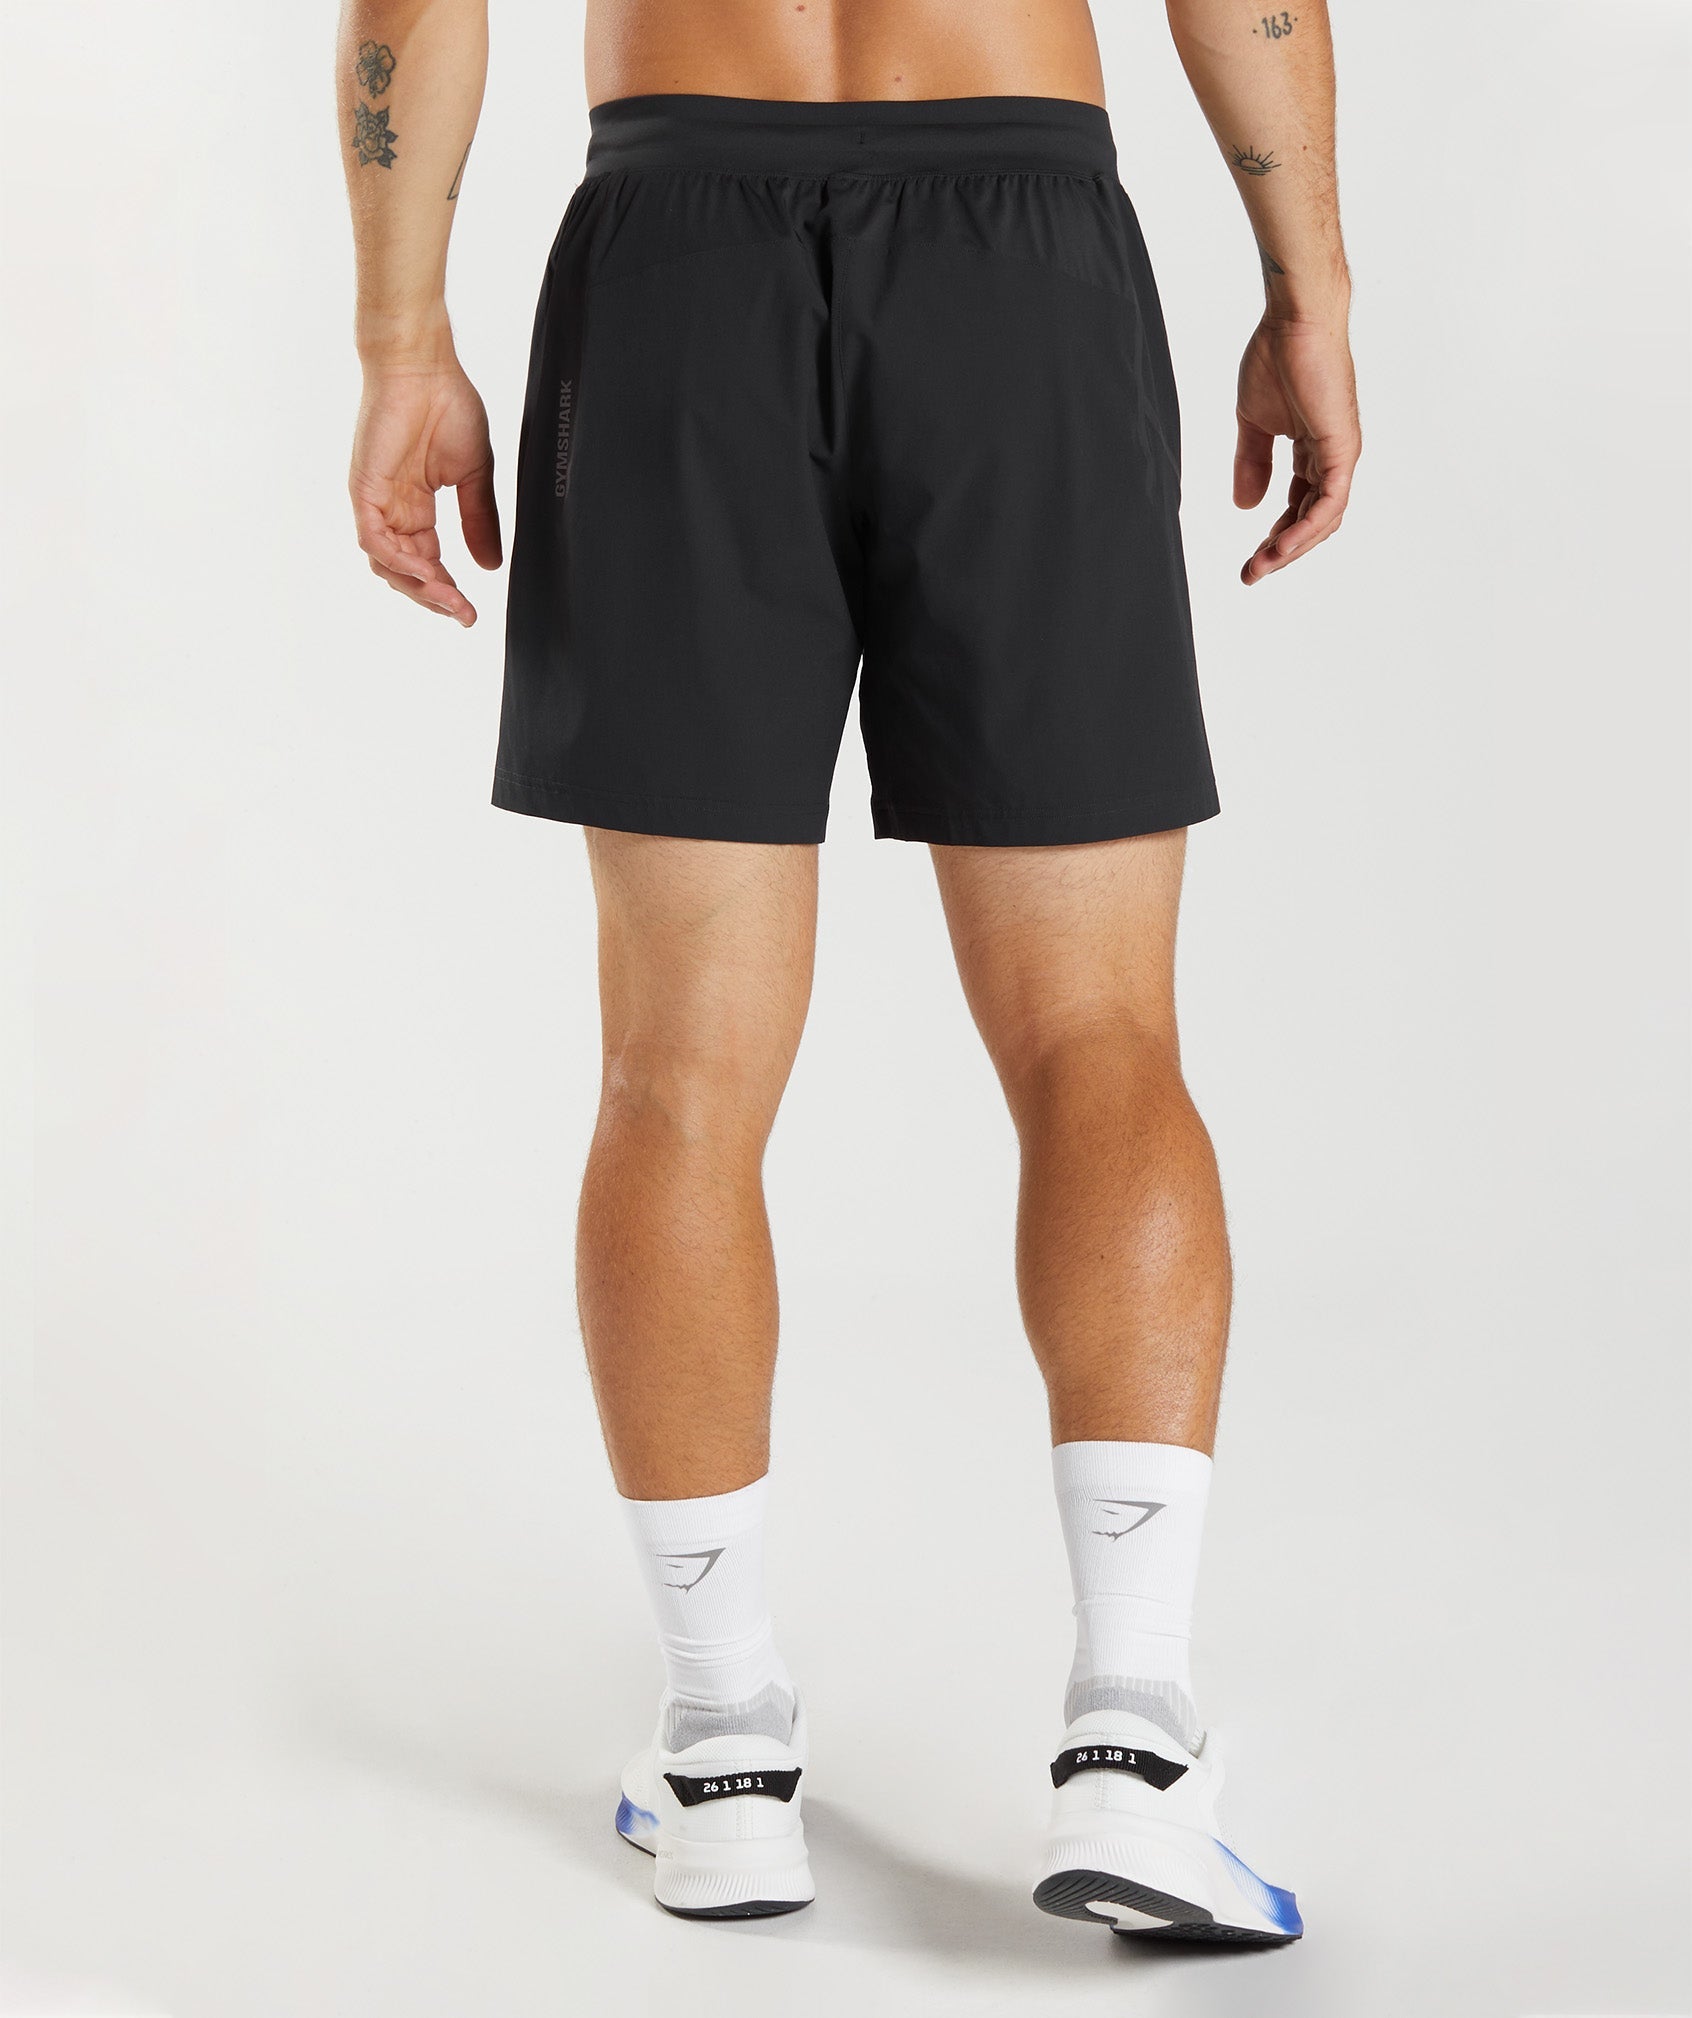 Apex 8" Function Shorts in Black - view 2